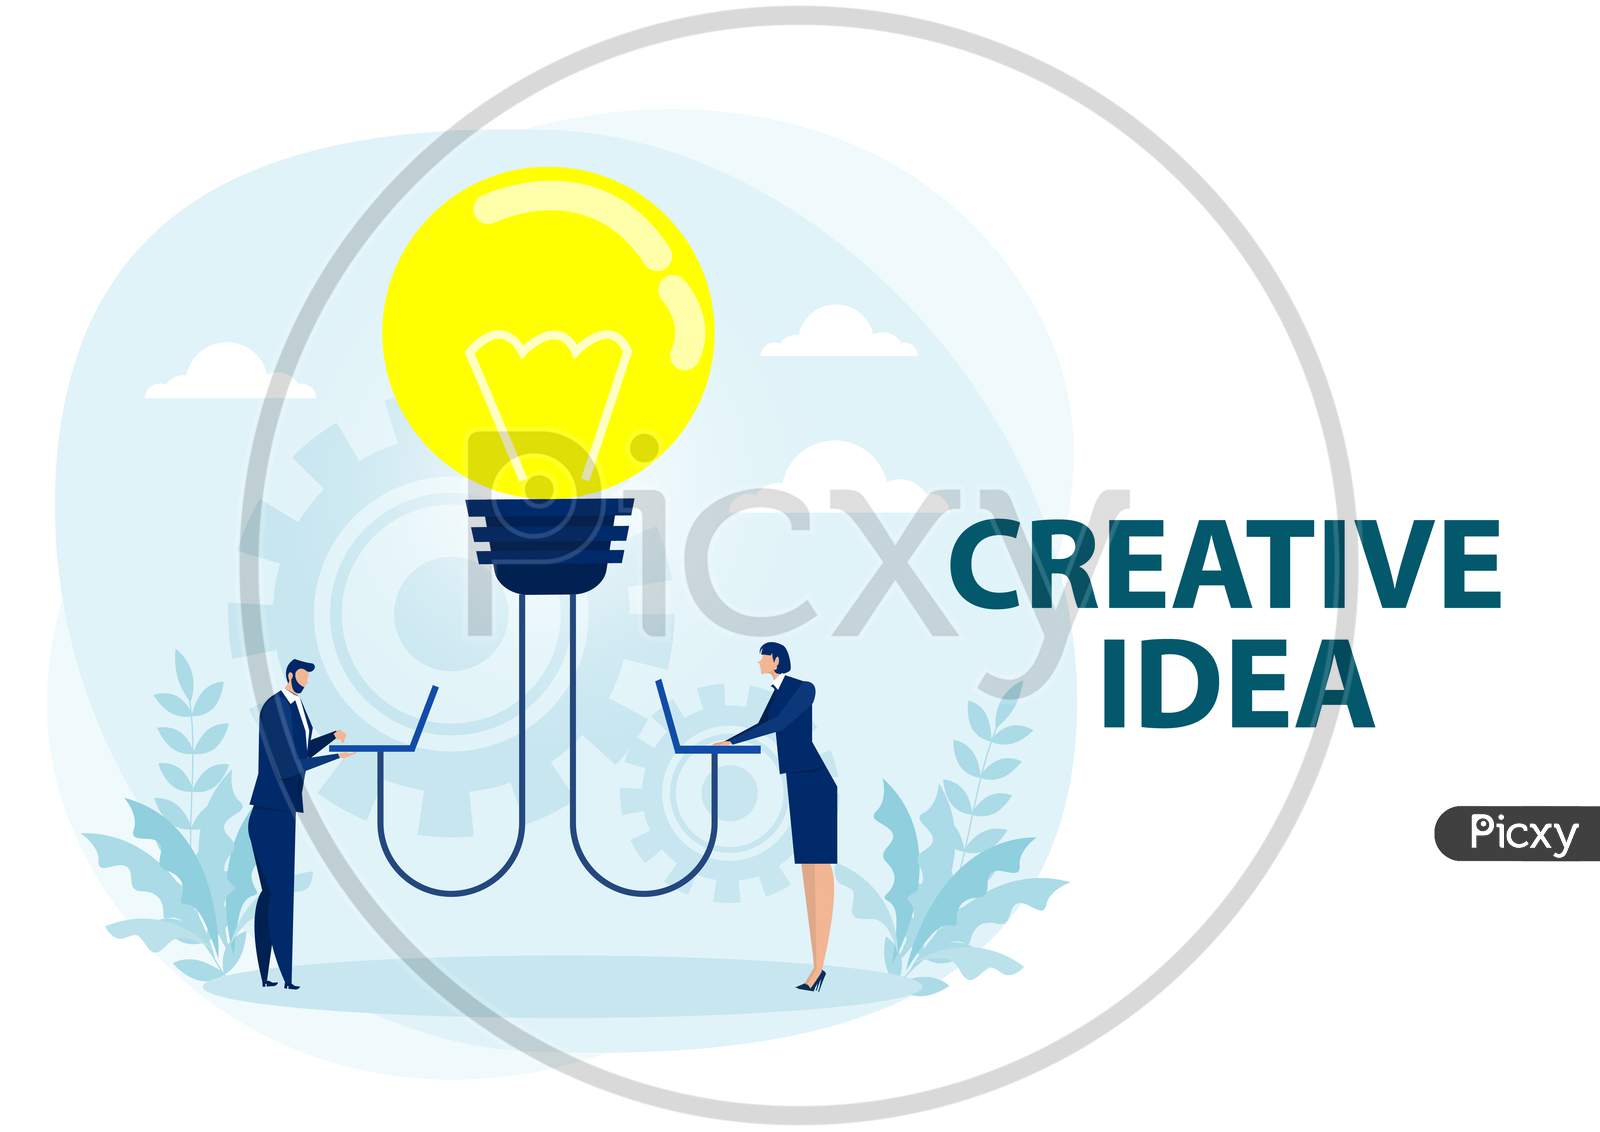 Man And Woman Share Idea With A Light Bulb, A Metaphor For The Search For An Idea. Vector Illustration